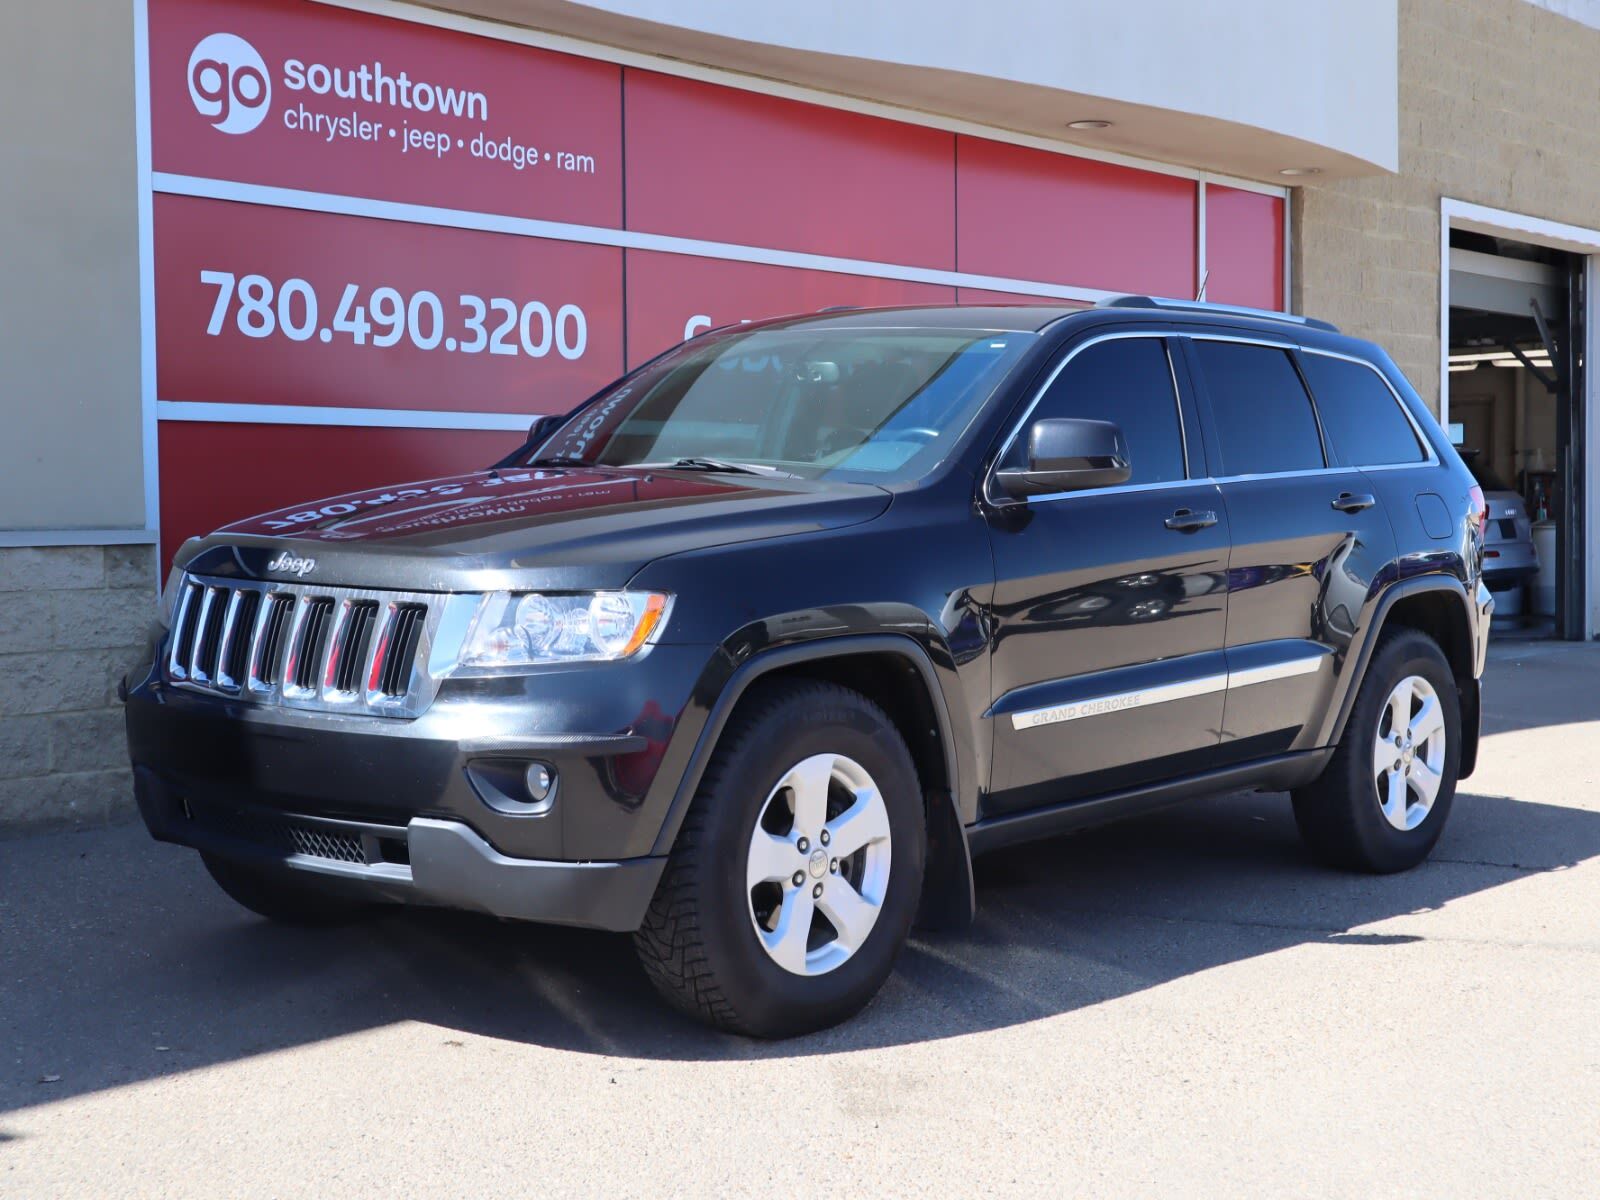 2013 Jeep Grand Cherokee LAREDO IN BLACK EQUIPPED WITH A 290HP 3.6L V6 , 4X